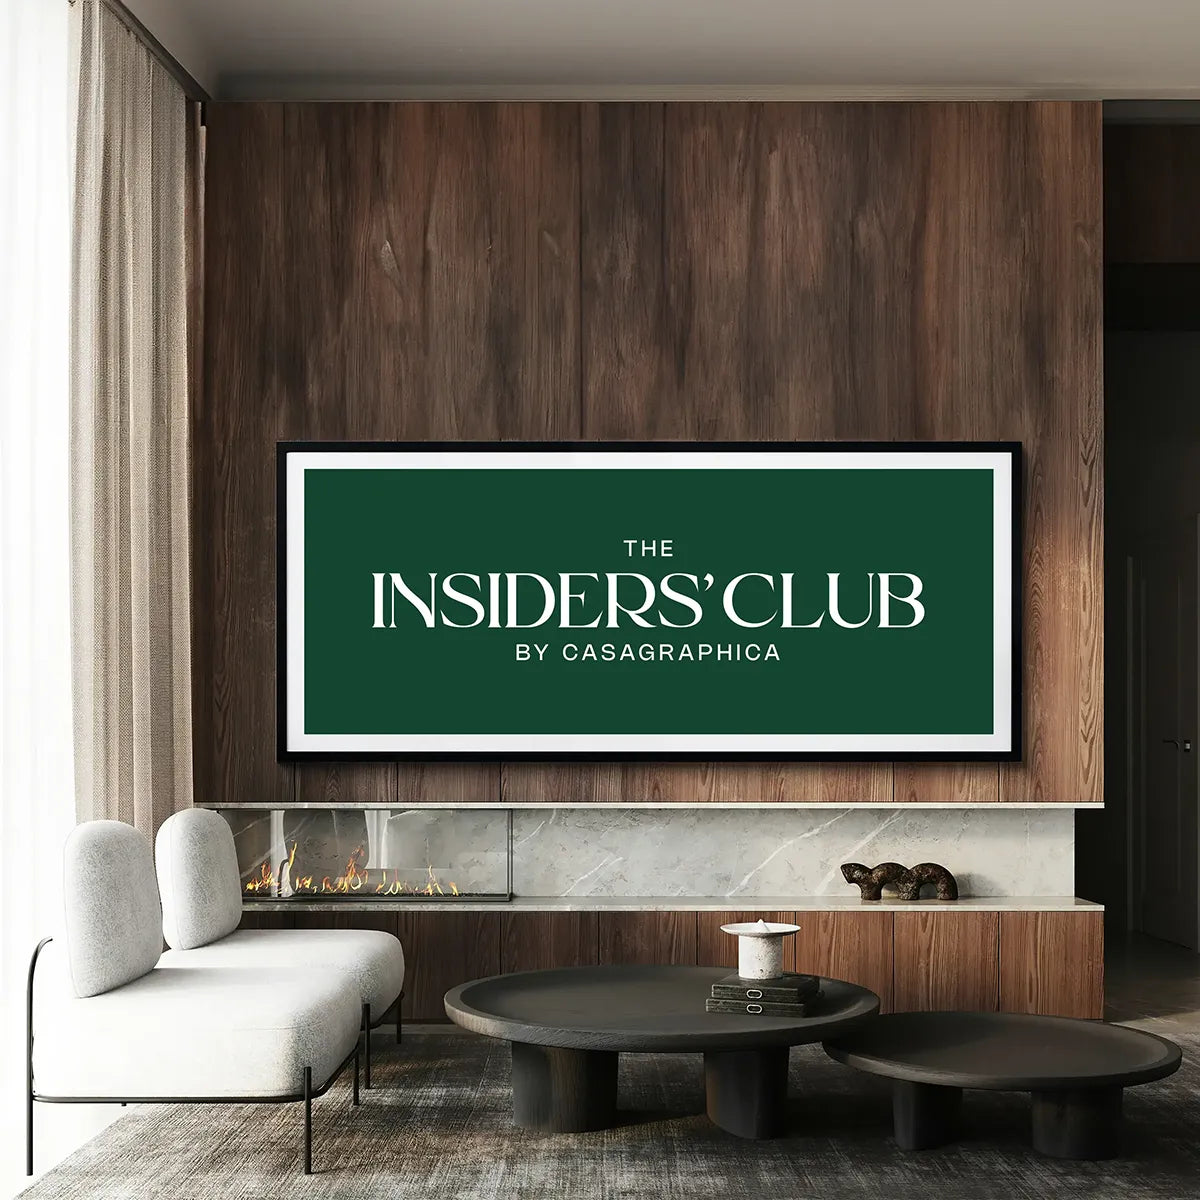 The Insiders' Club by Casagraphica: Where Prestige meets Privilege